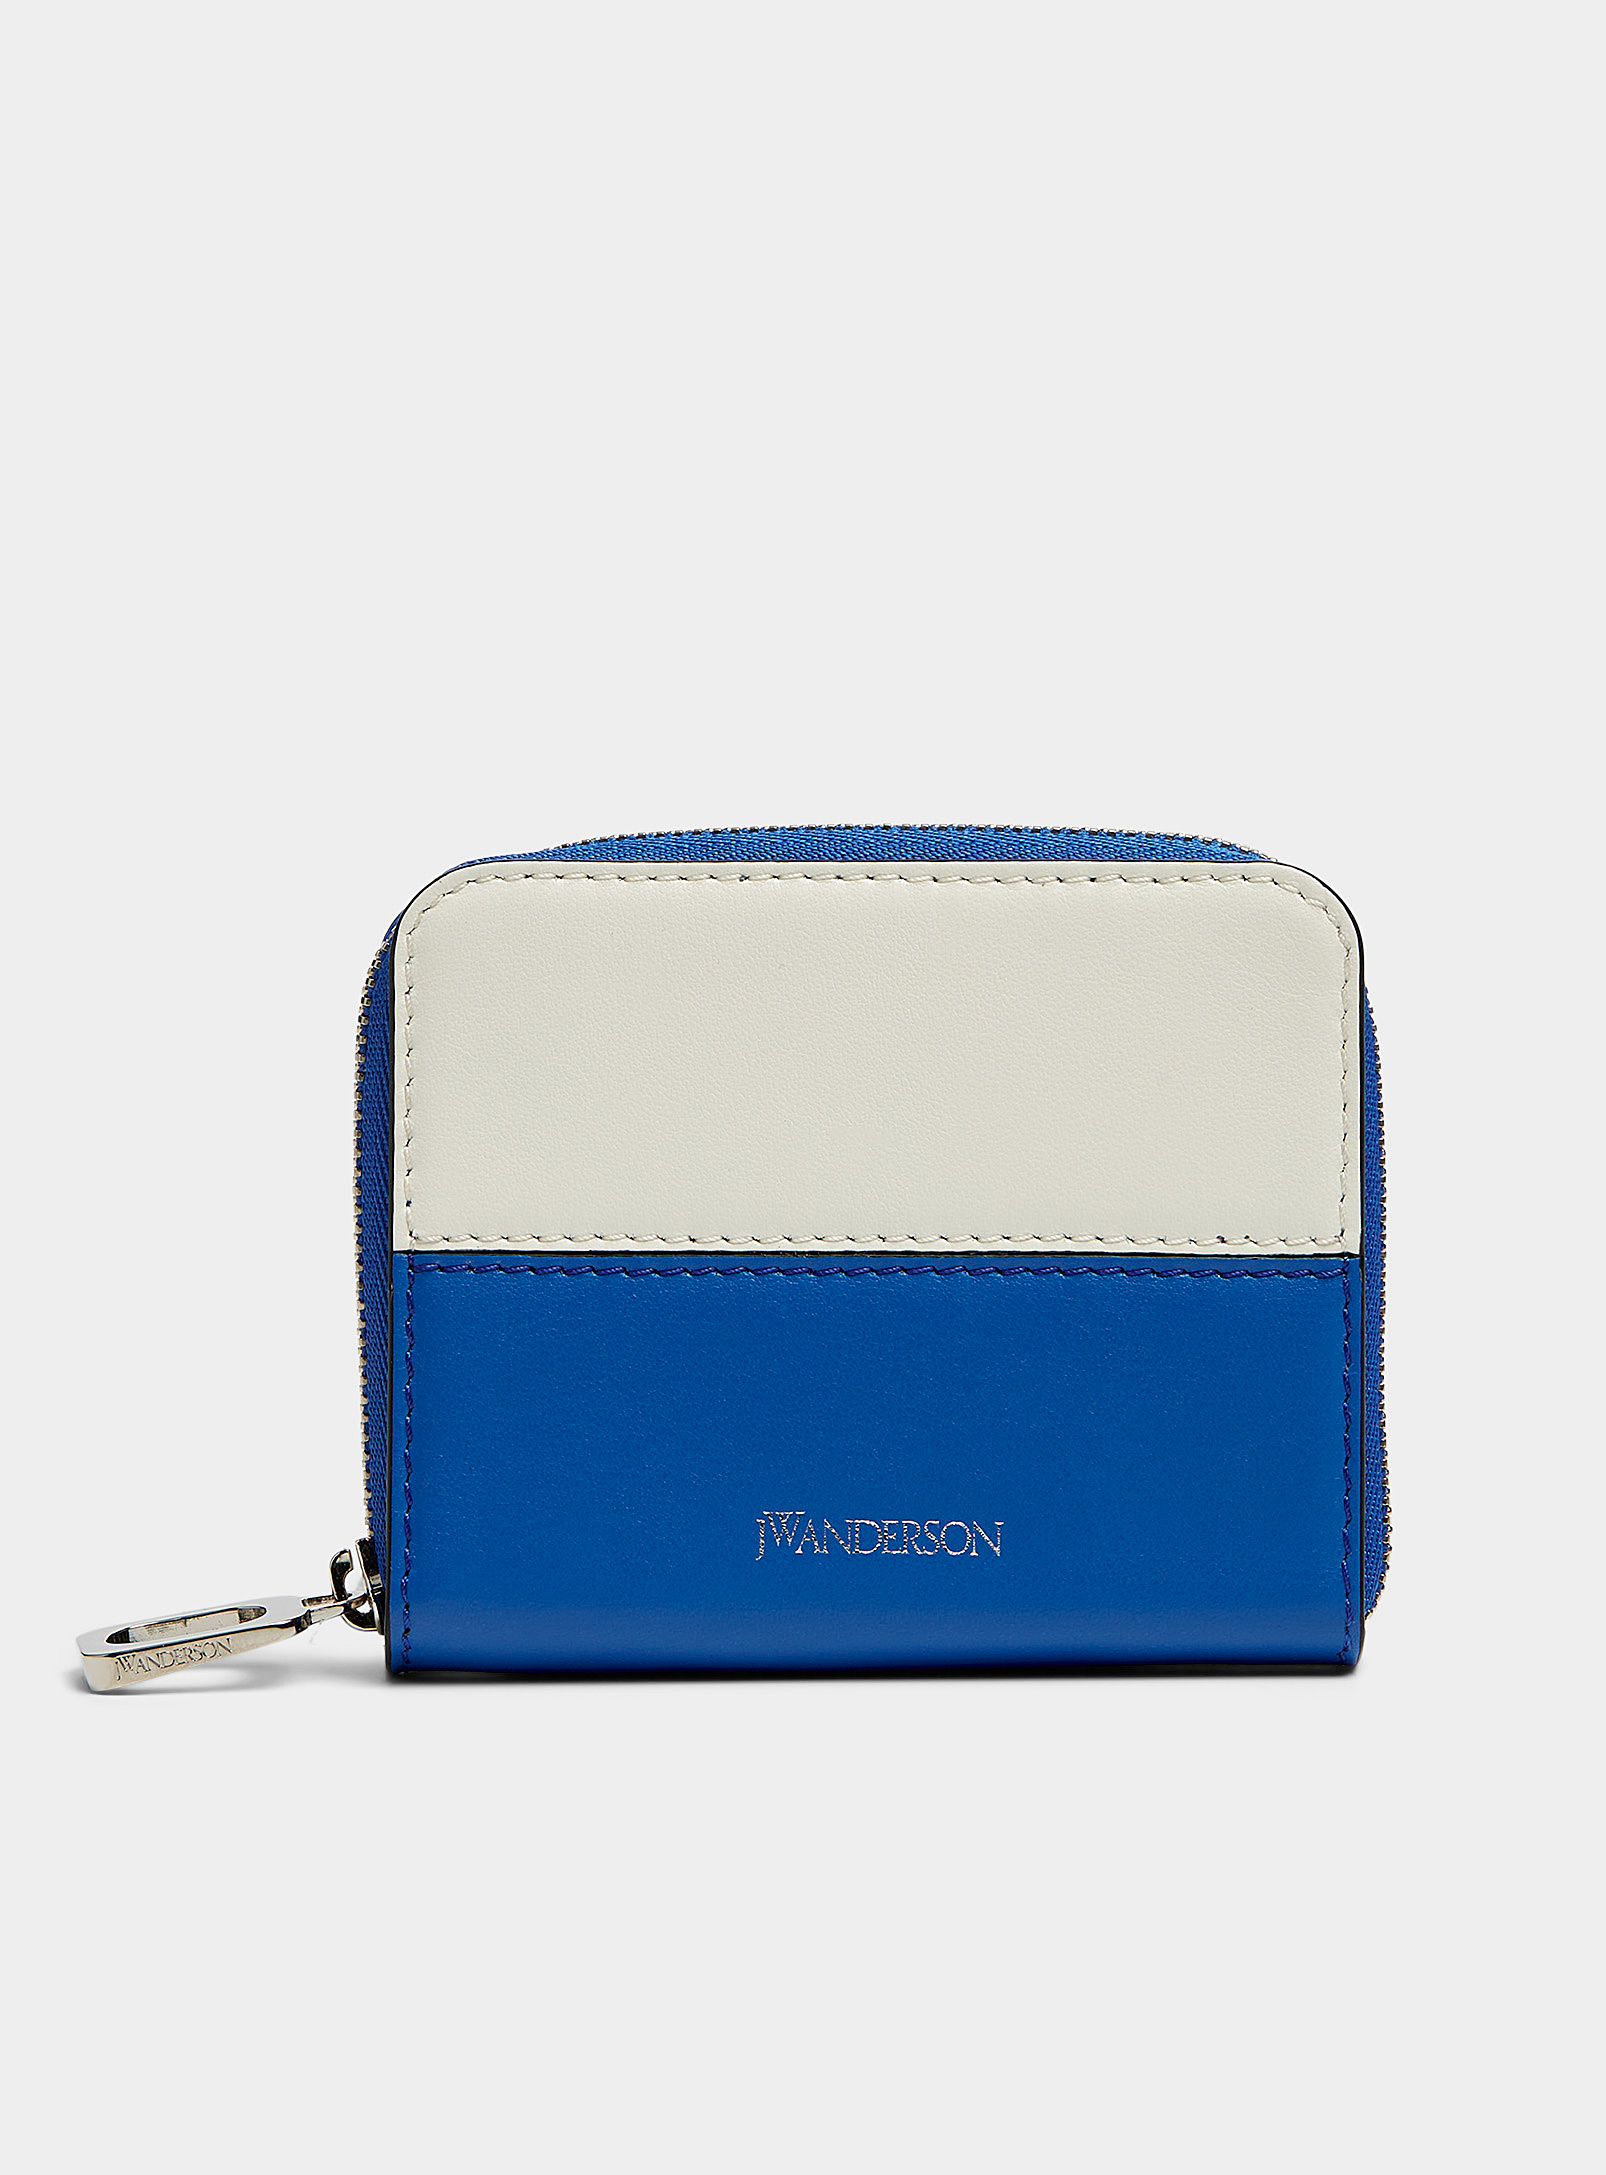 Jw Anderson Signature Two-tone Coin Purse In Baby Blue